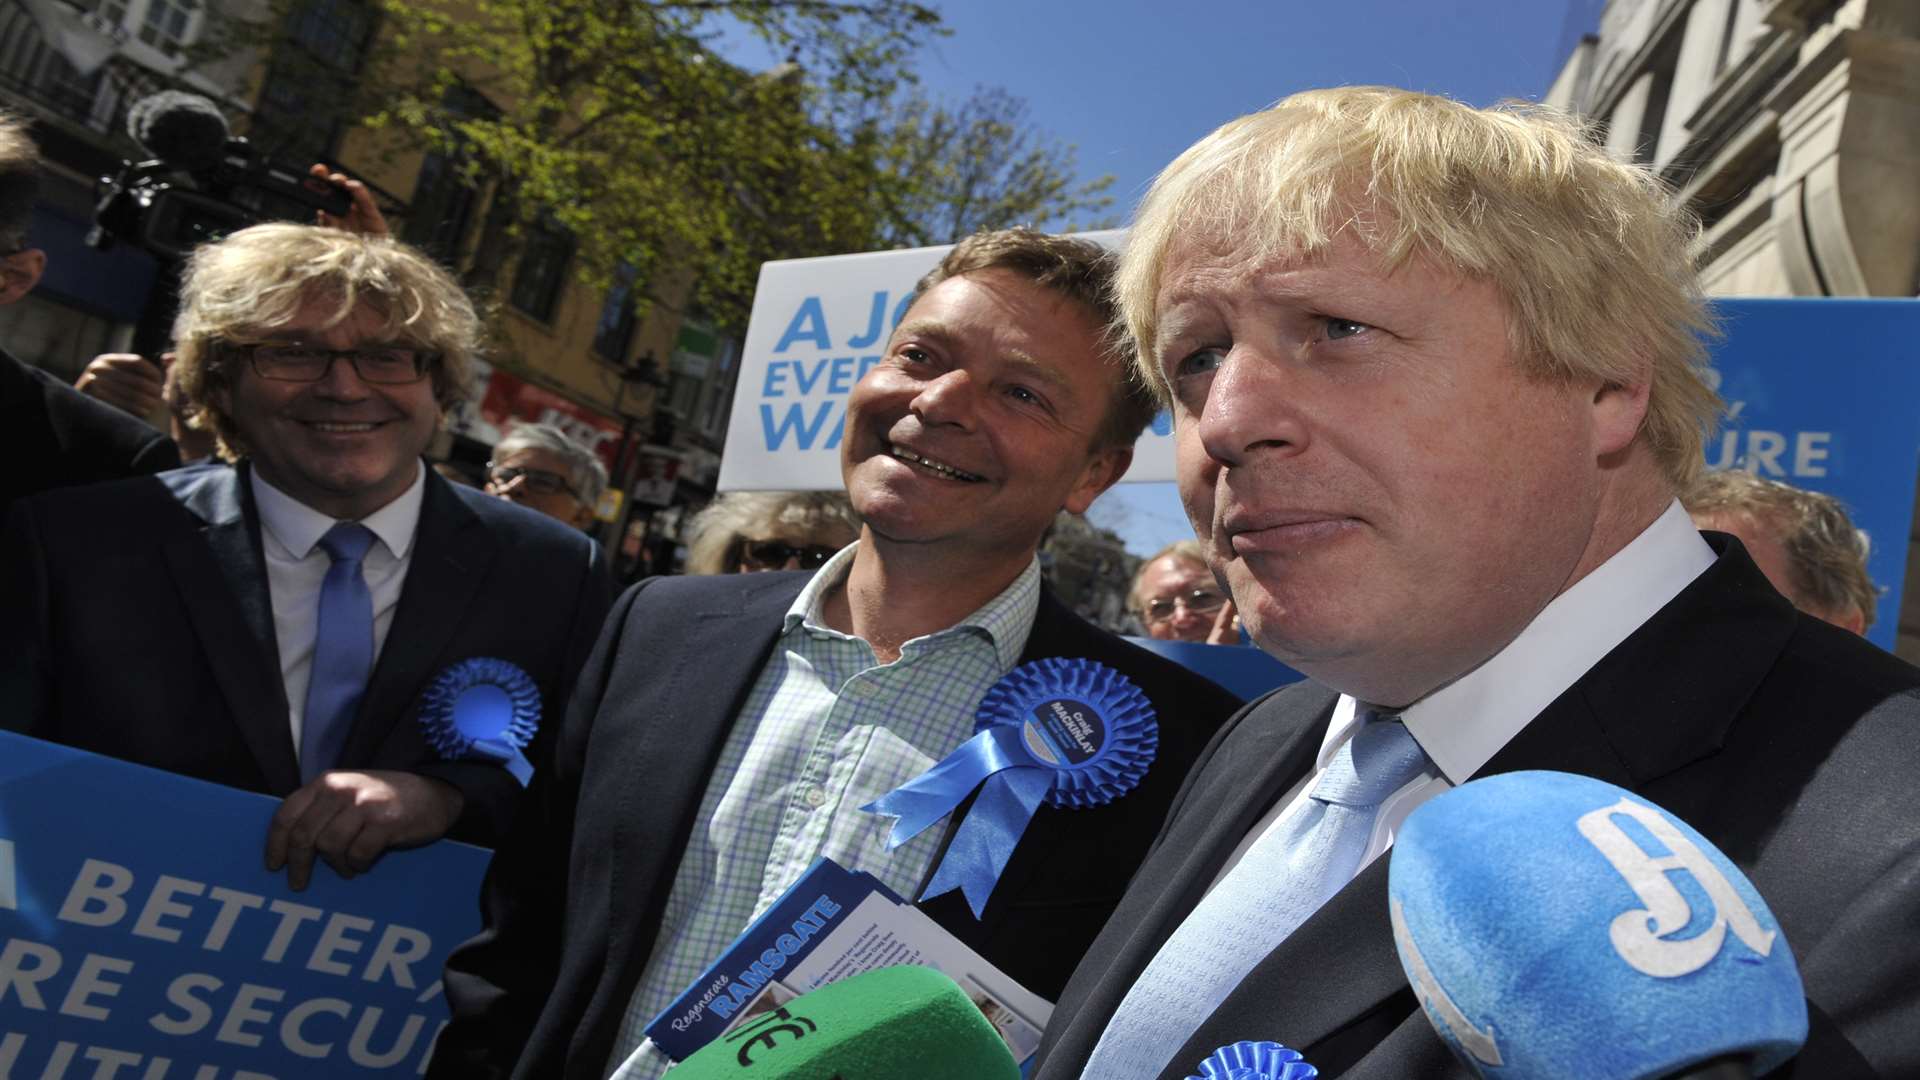 Boris Johnson was among many VIP visits to South Thanet during the election campaign